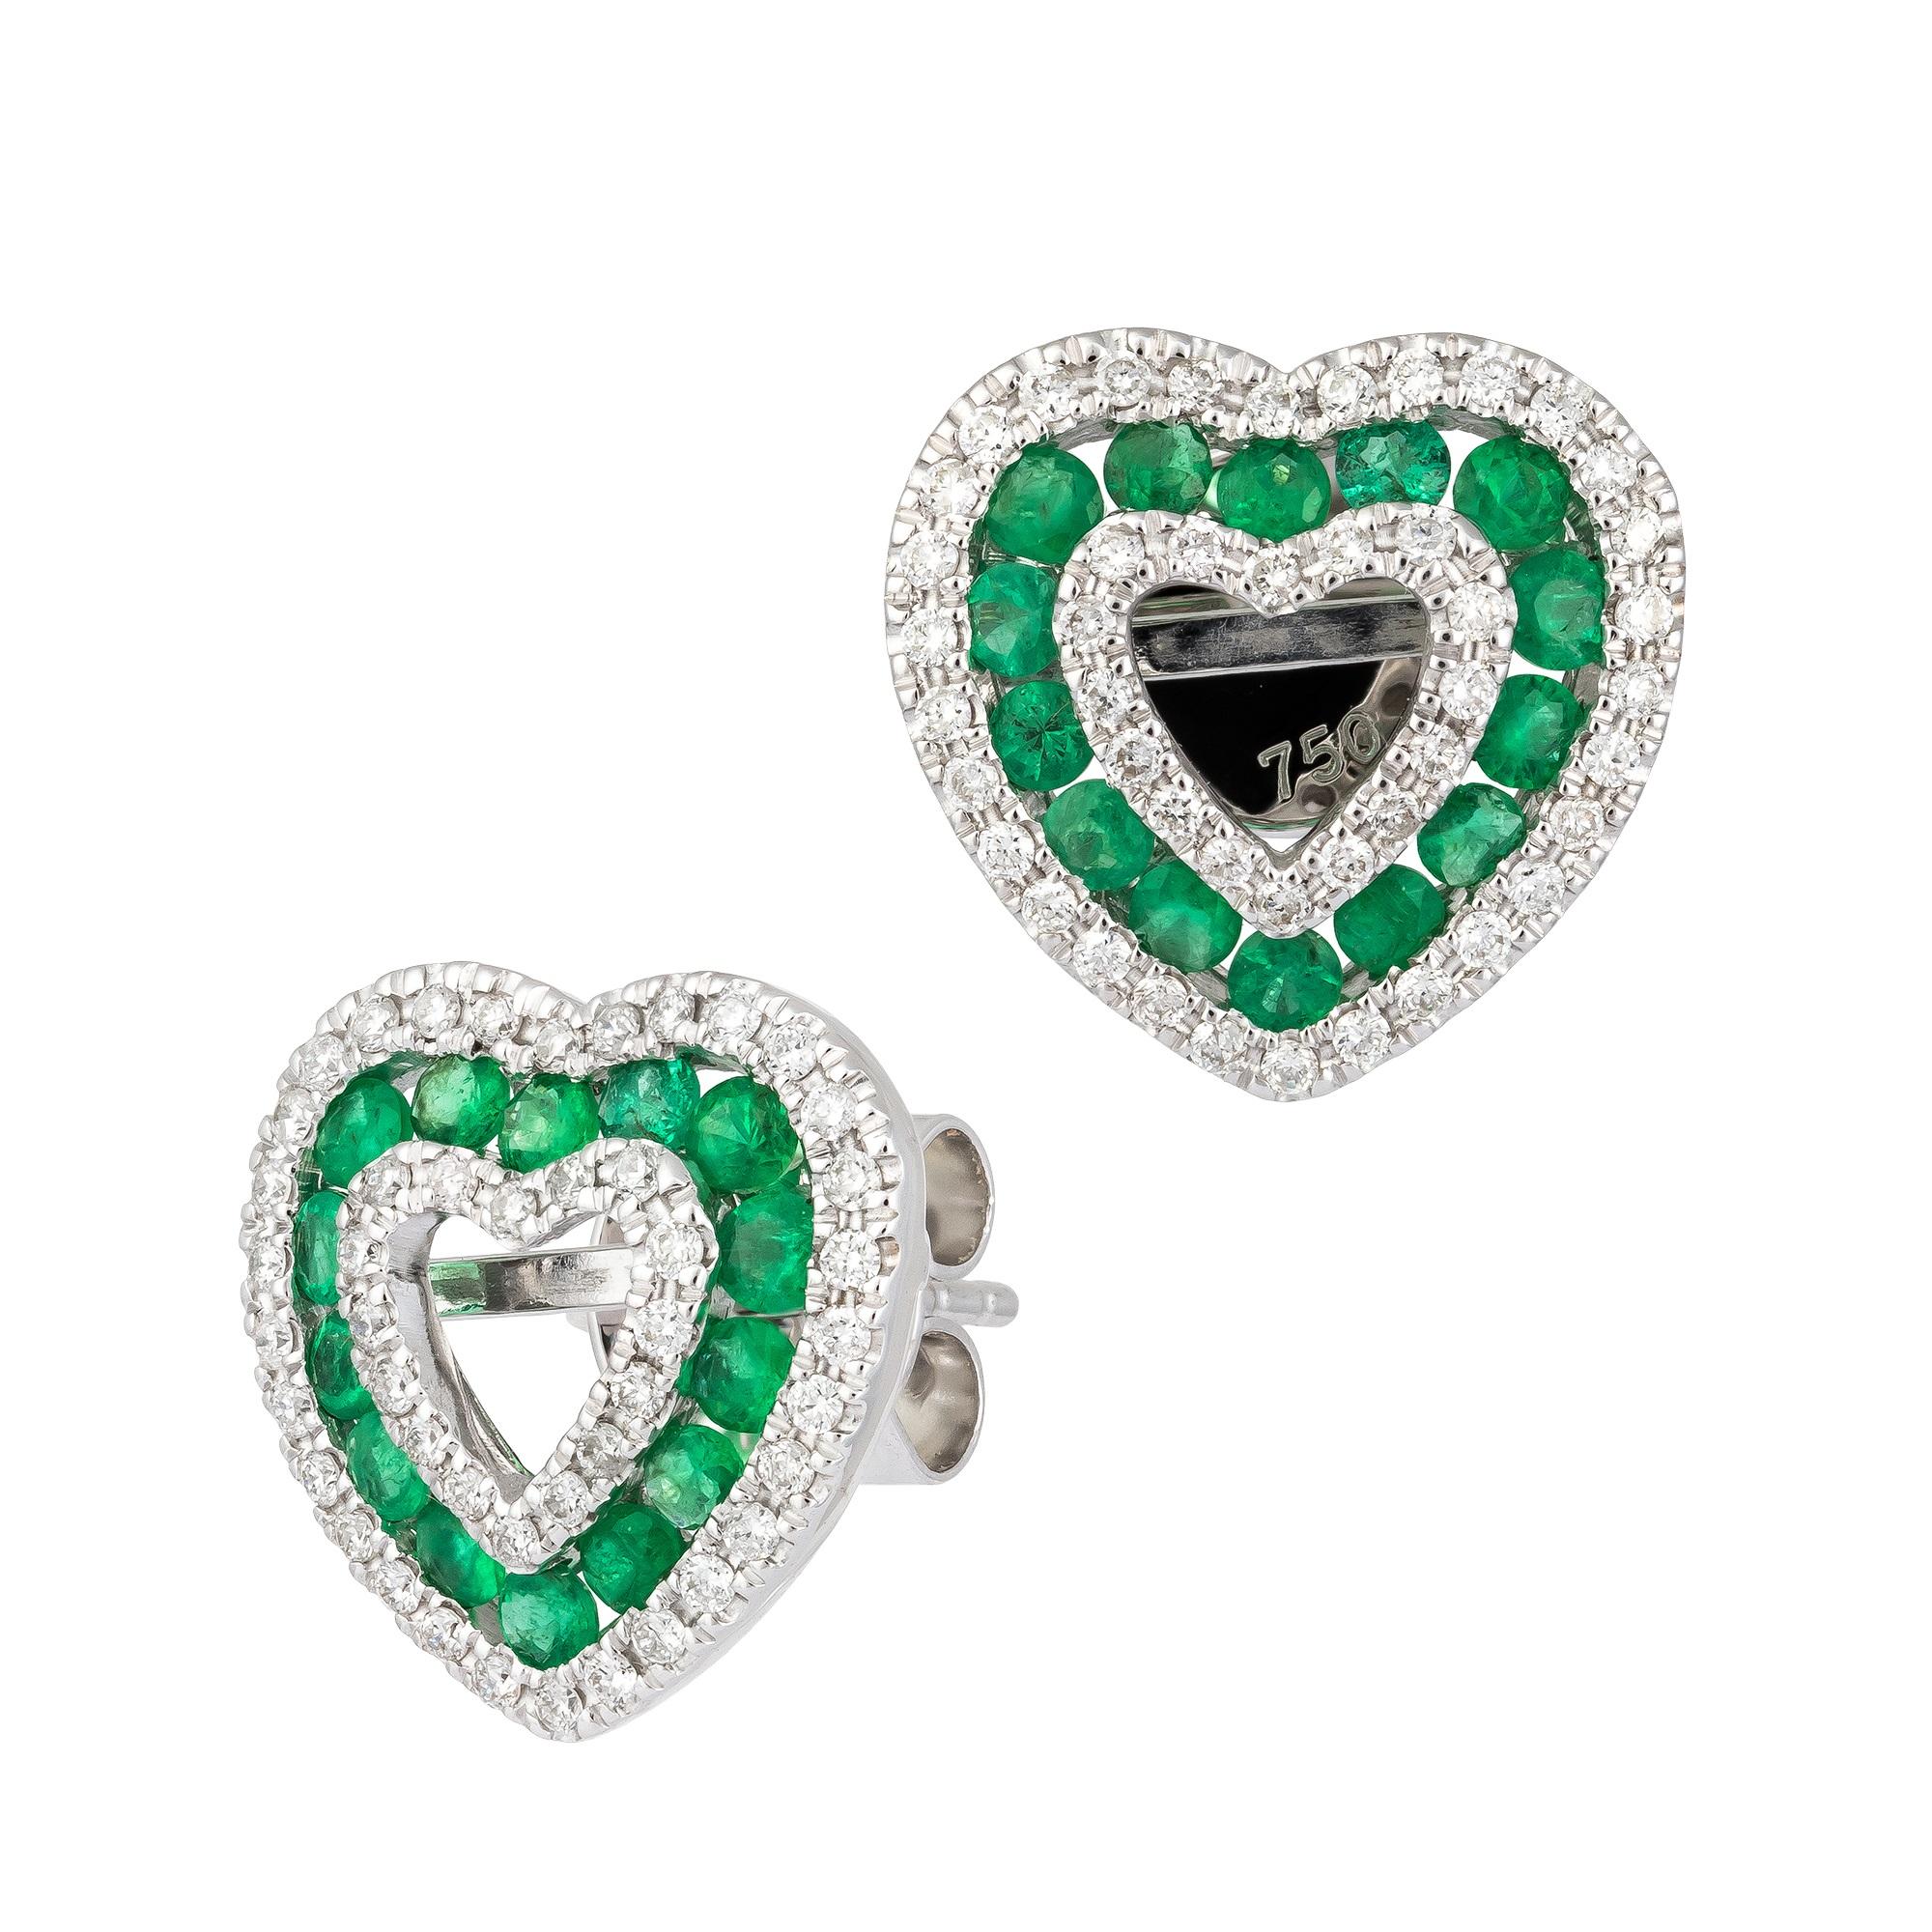 EARRING 18K White Gold Diamond 0.46 Cts/92 Pieces, Emerald 0.72 Cts/28 Pieces
